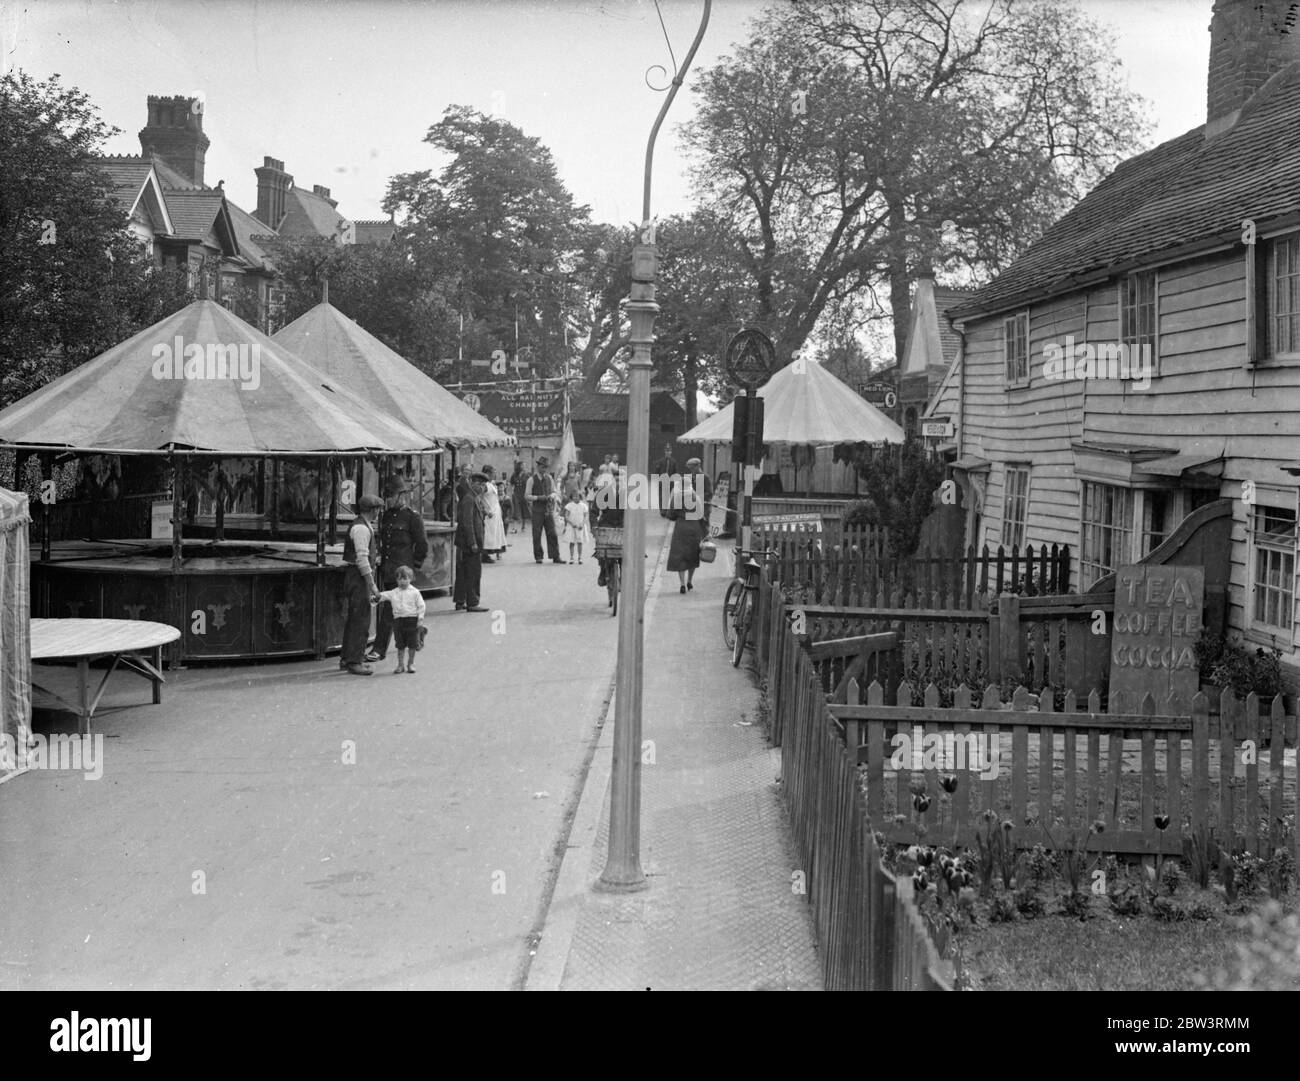 800 year old Cheam Fair opens in street as council searches for twelfth century charter . The Fair in Park Road , Cheam . 15 May 1936 Stock Photo